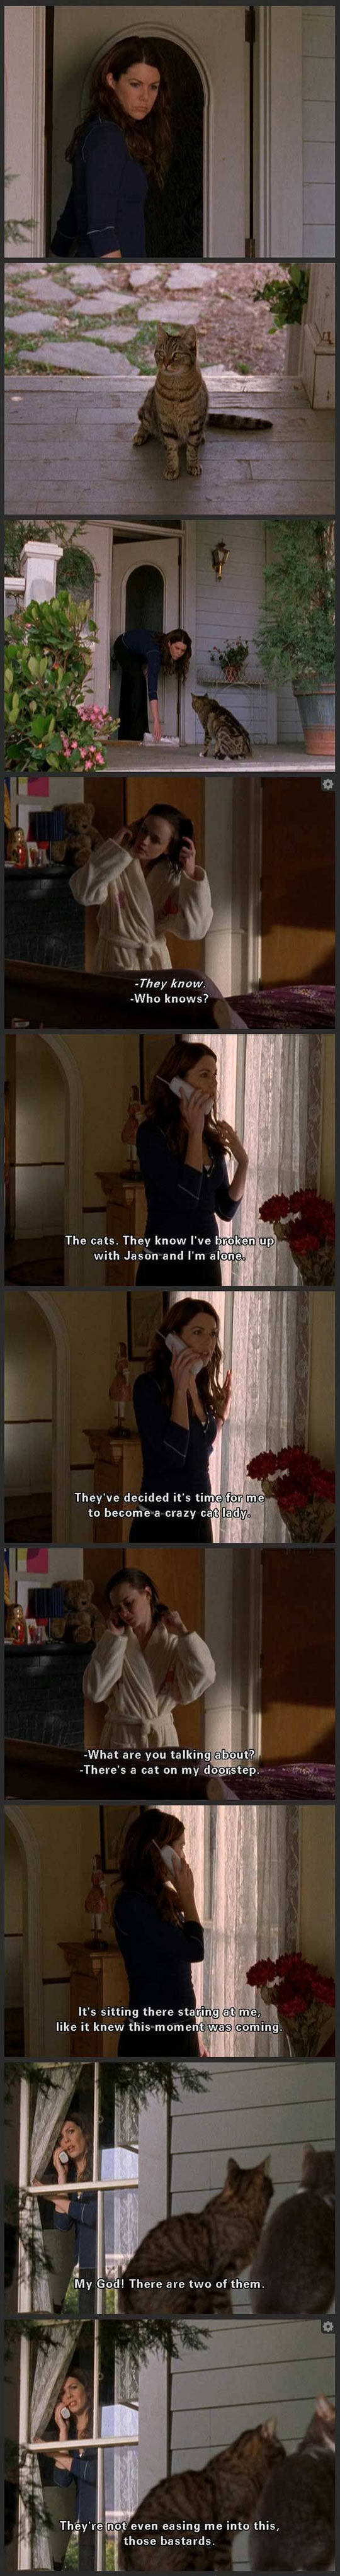 funny-Gilmore-Girls-crazy-cat-lady